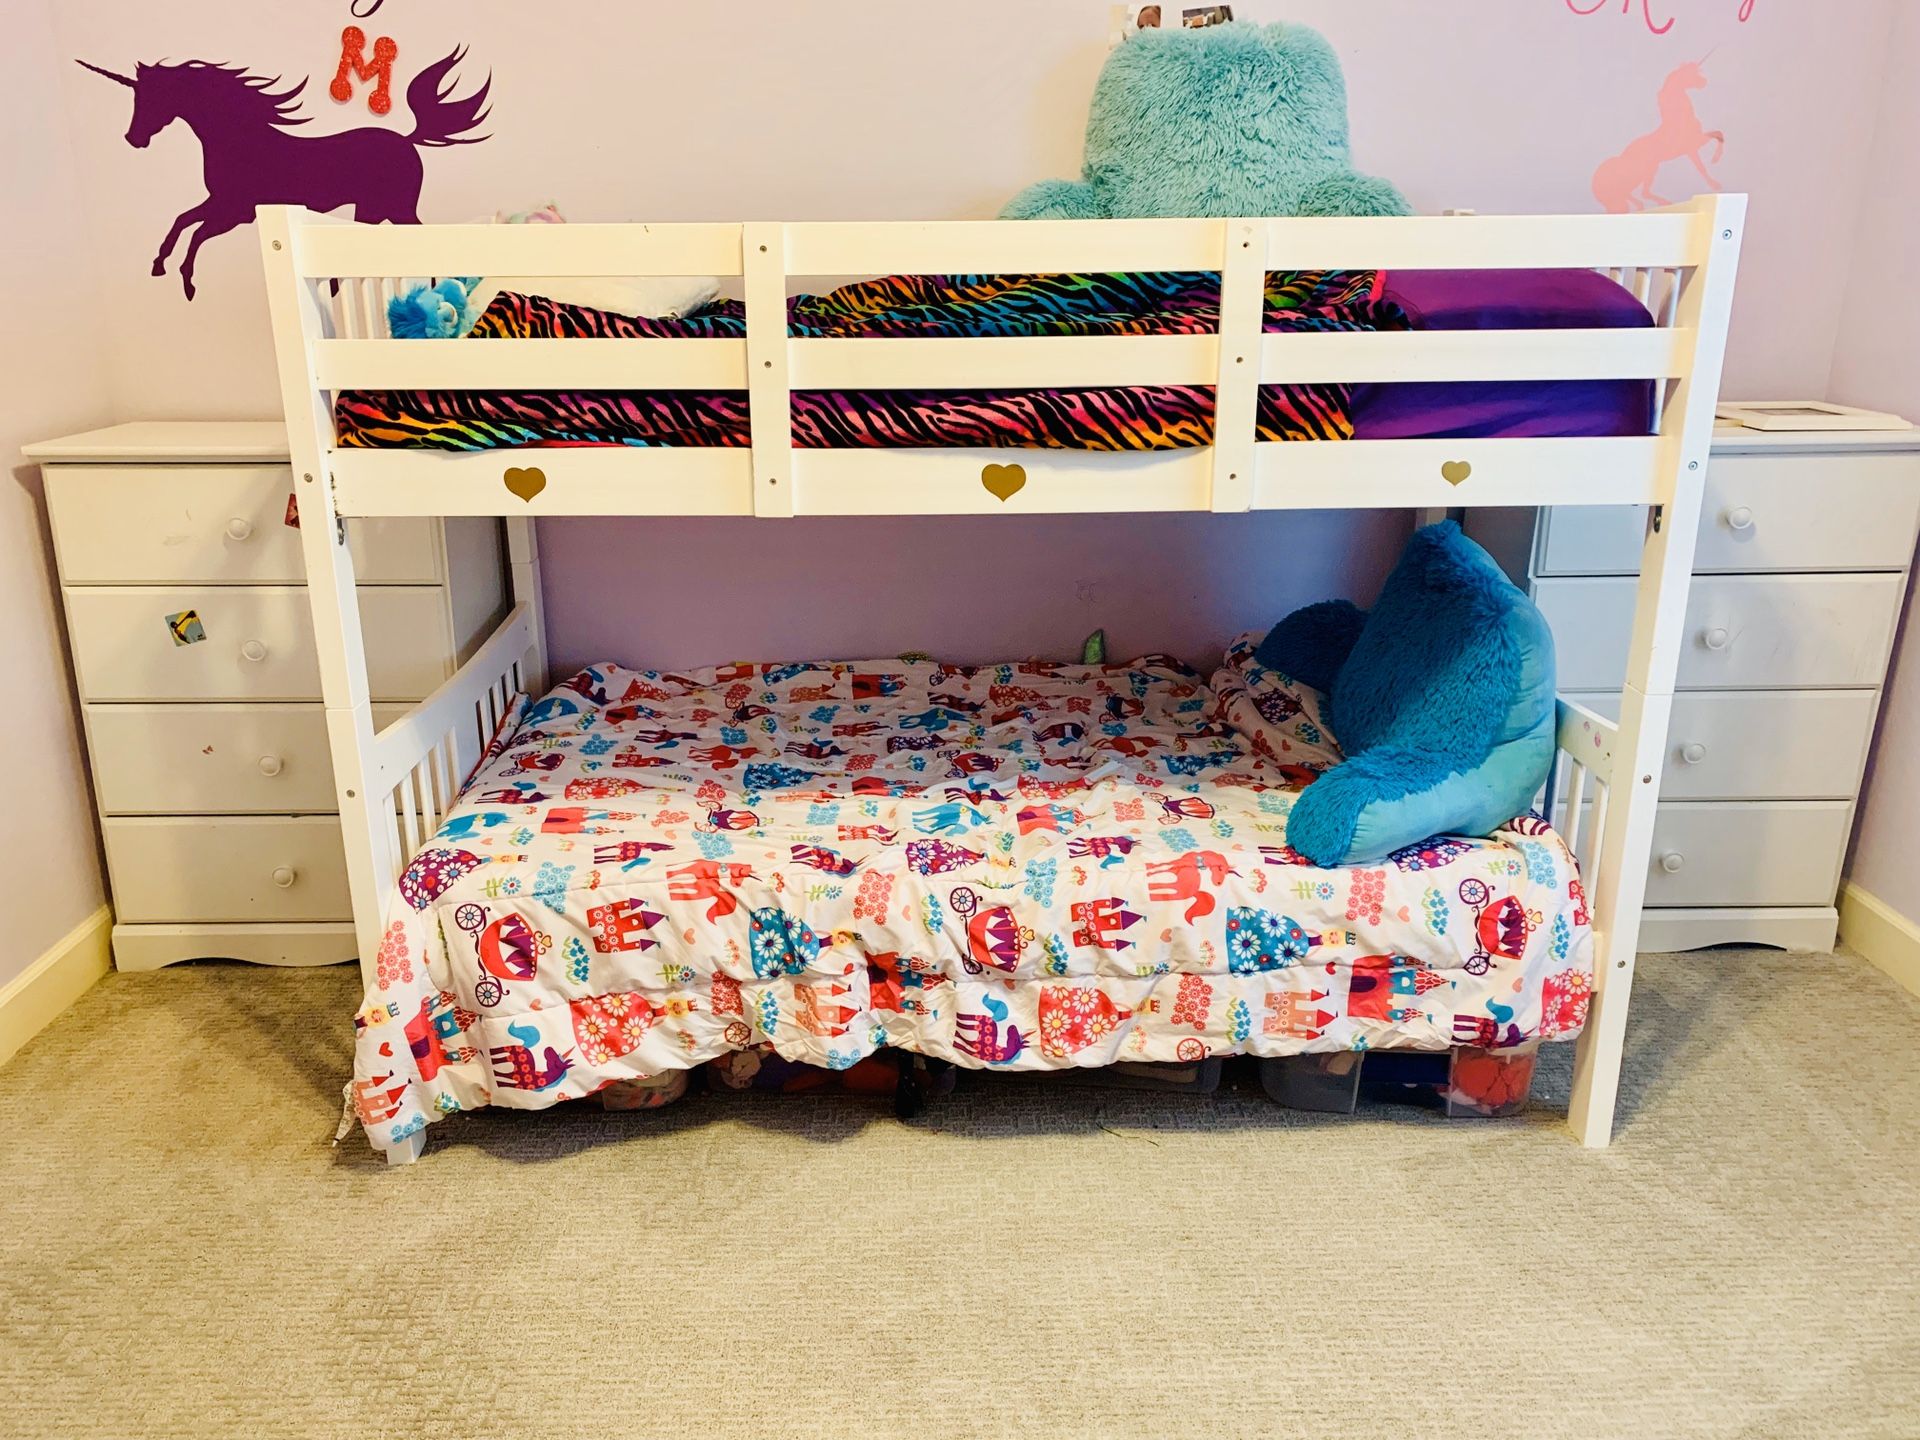 Bunk beds and two white dressers $50 total. DOES NOT INCLUDE MATTRESSES